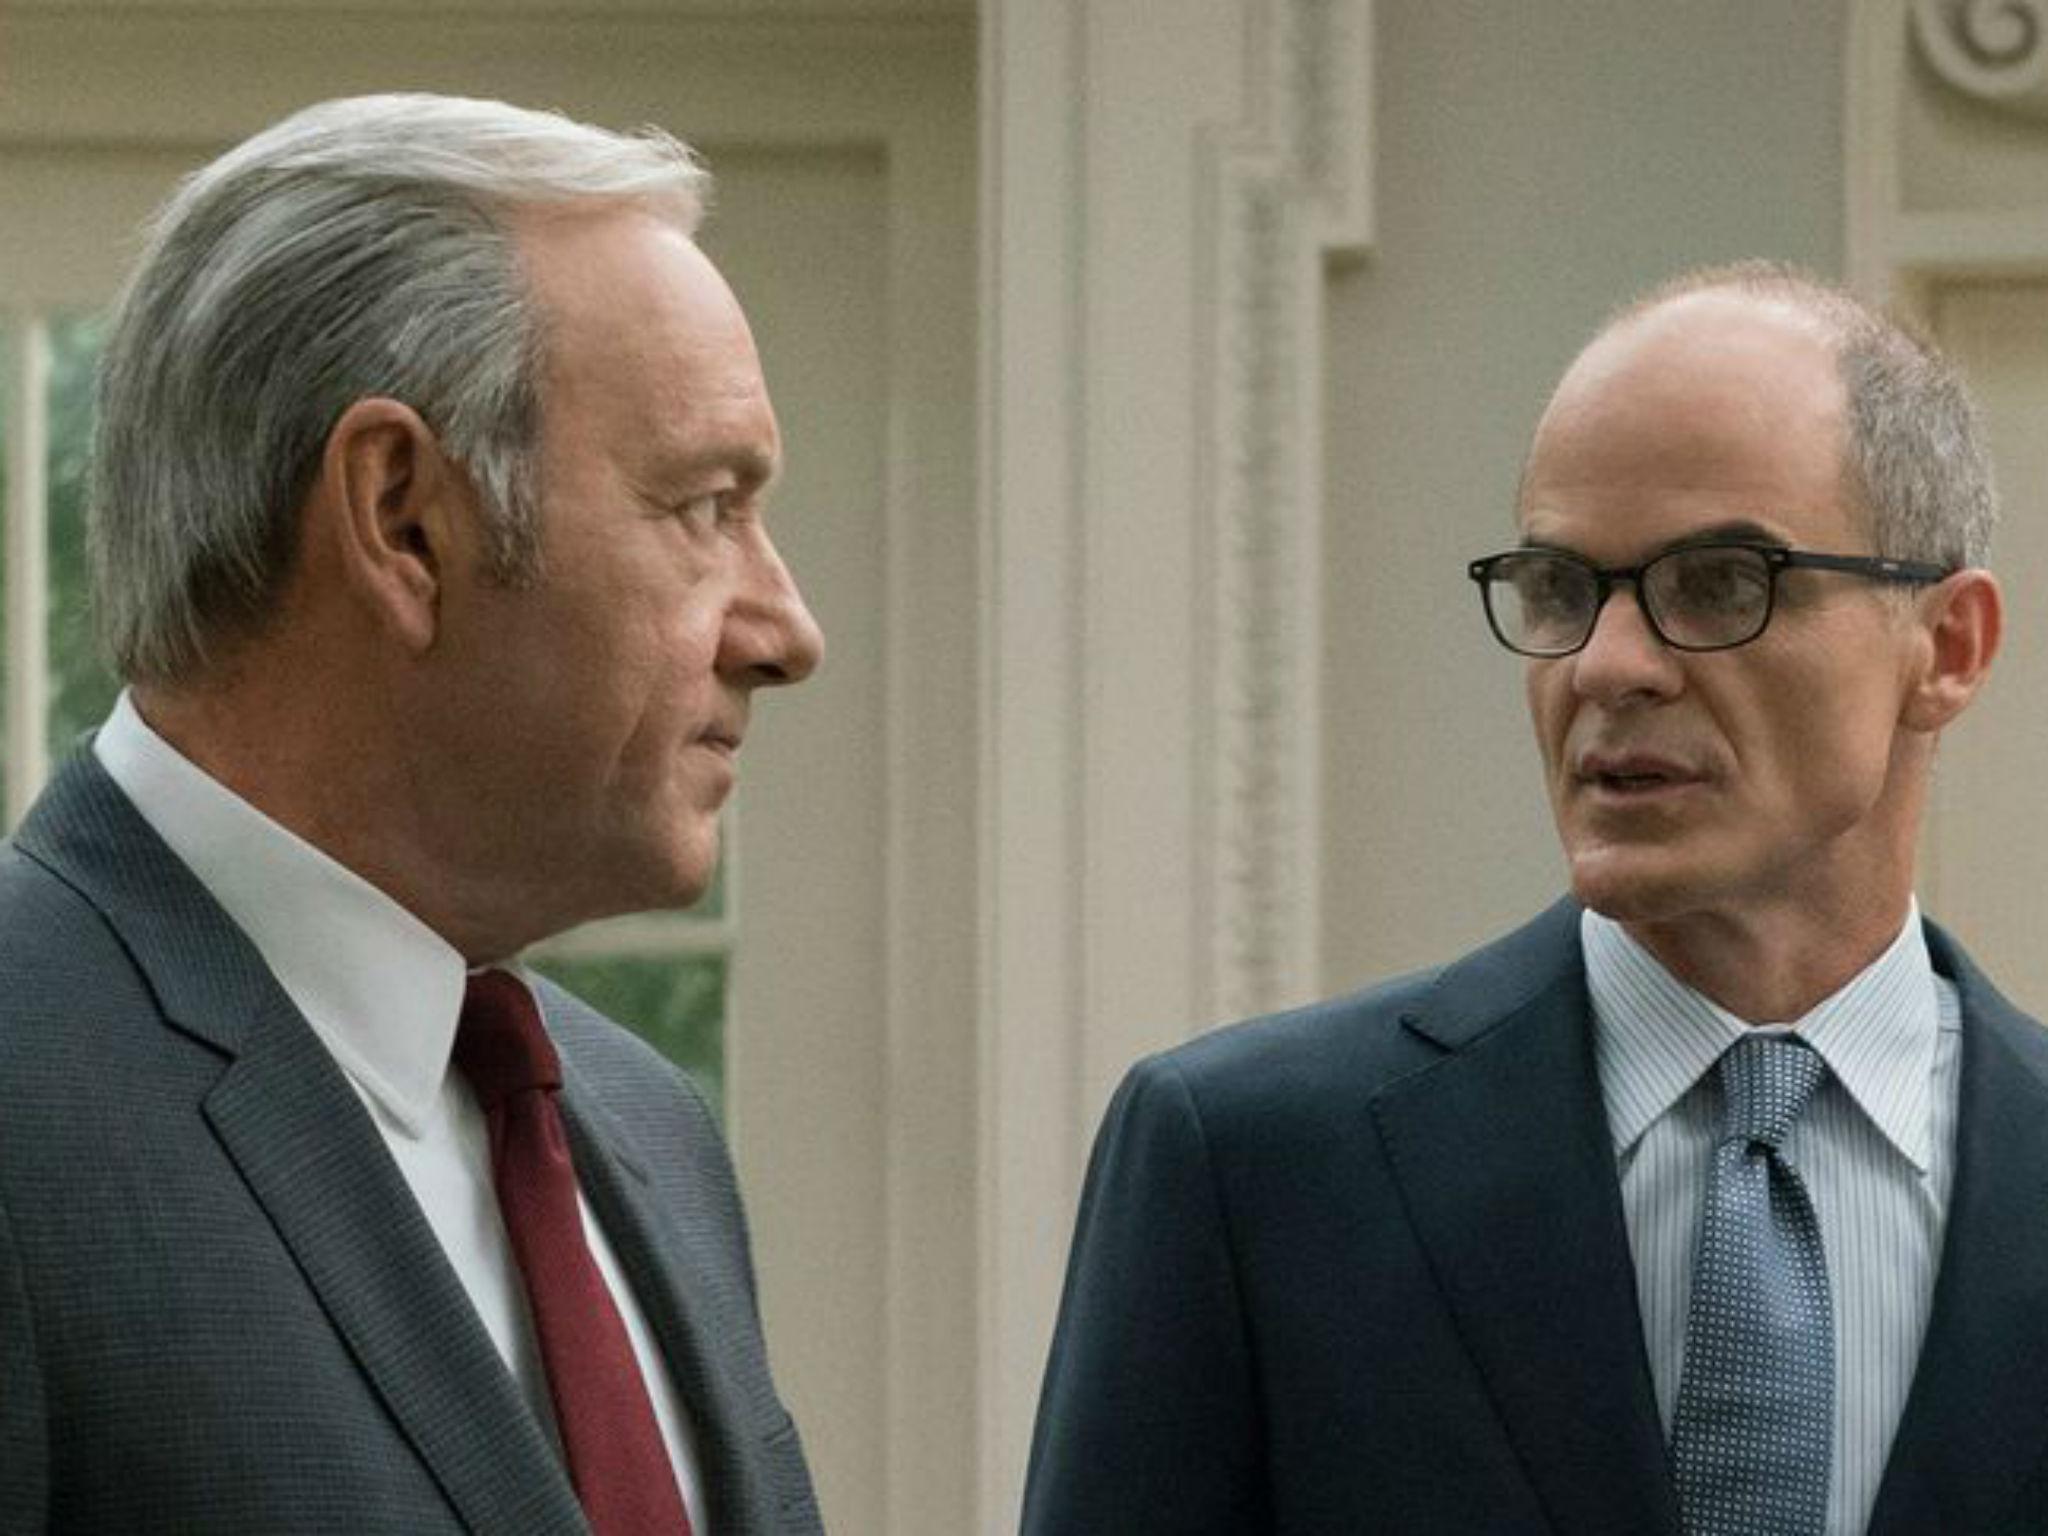 House of Cards actor Michael Kelly 'still processing' Kevin Spacey